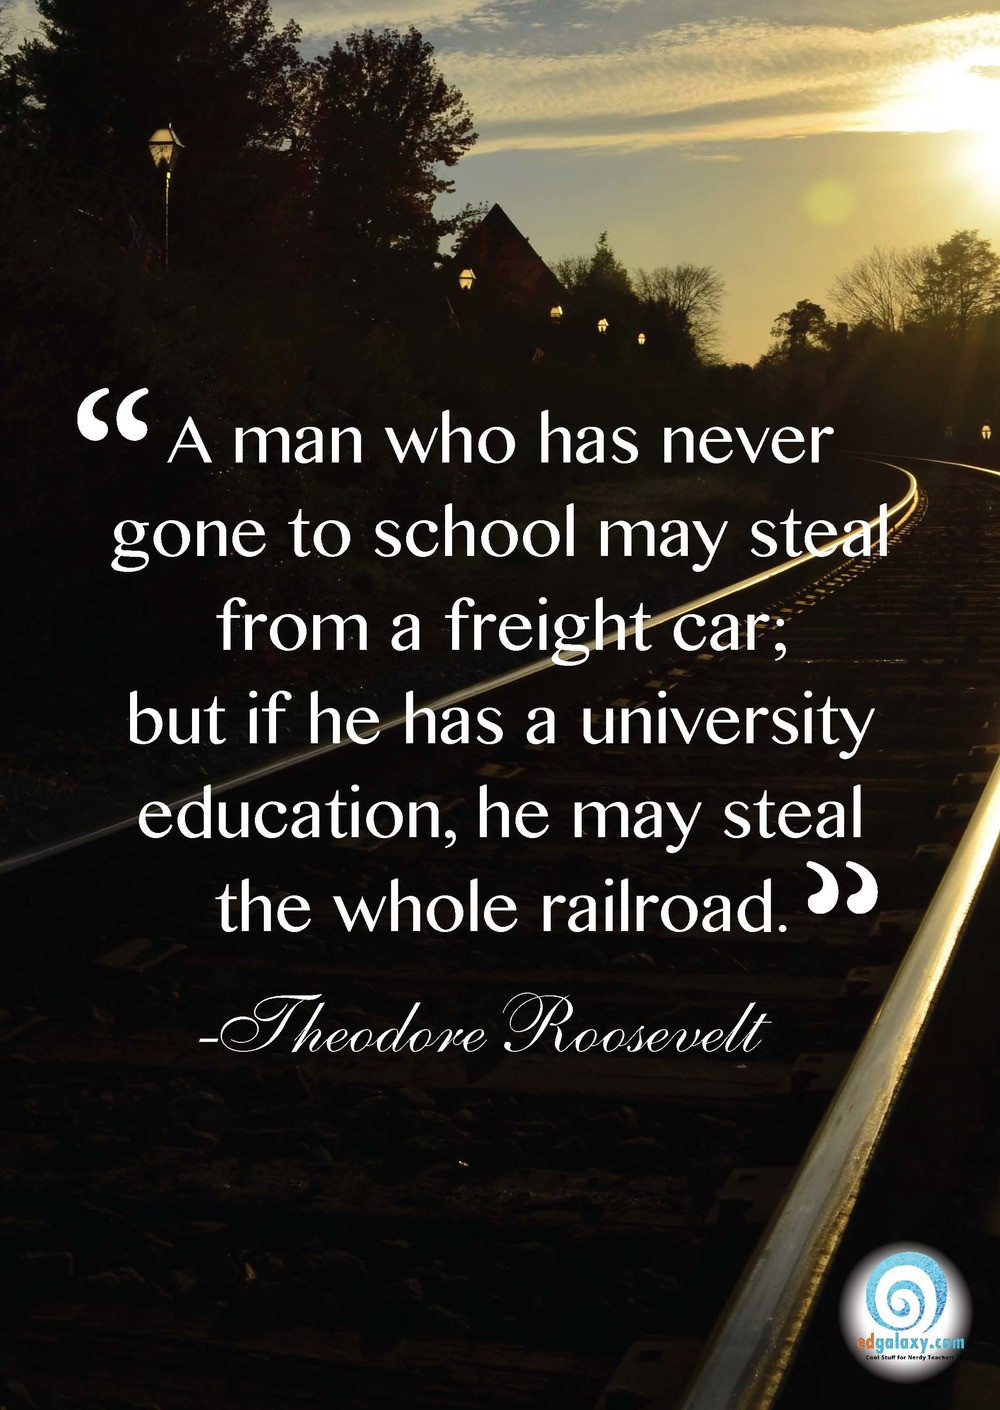 Education Quotes For Students
 Education Quotes Famous Quotes for teachers and Students